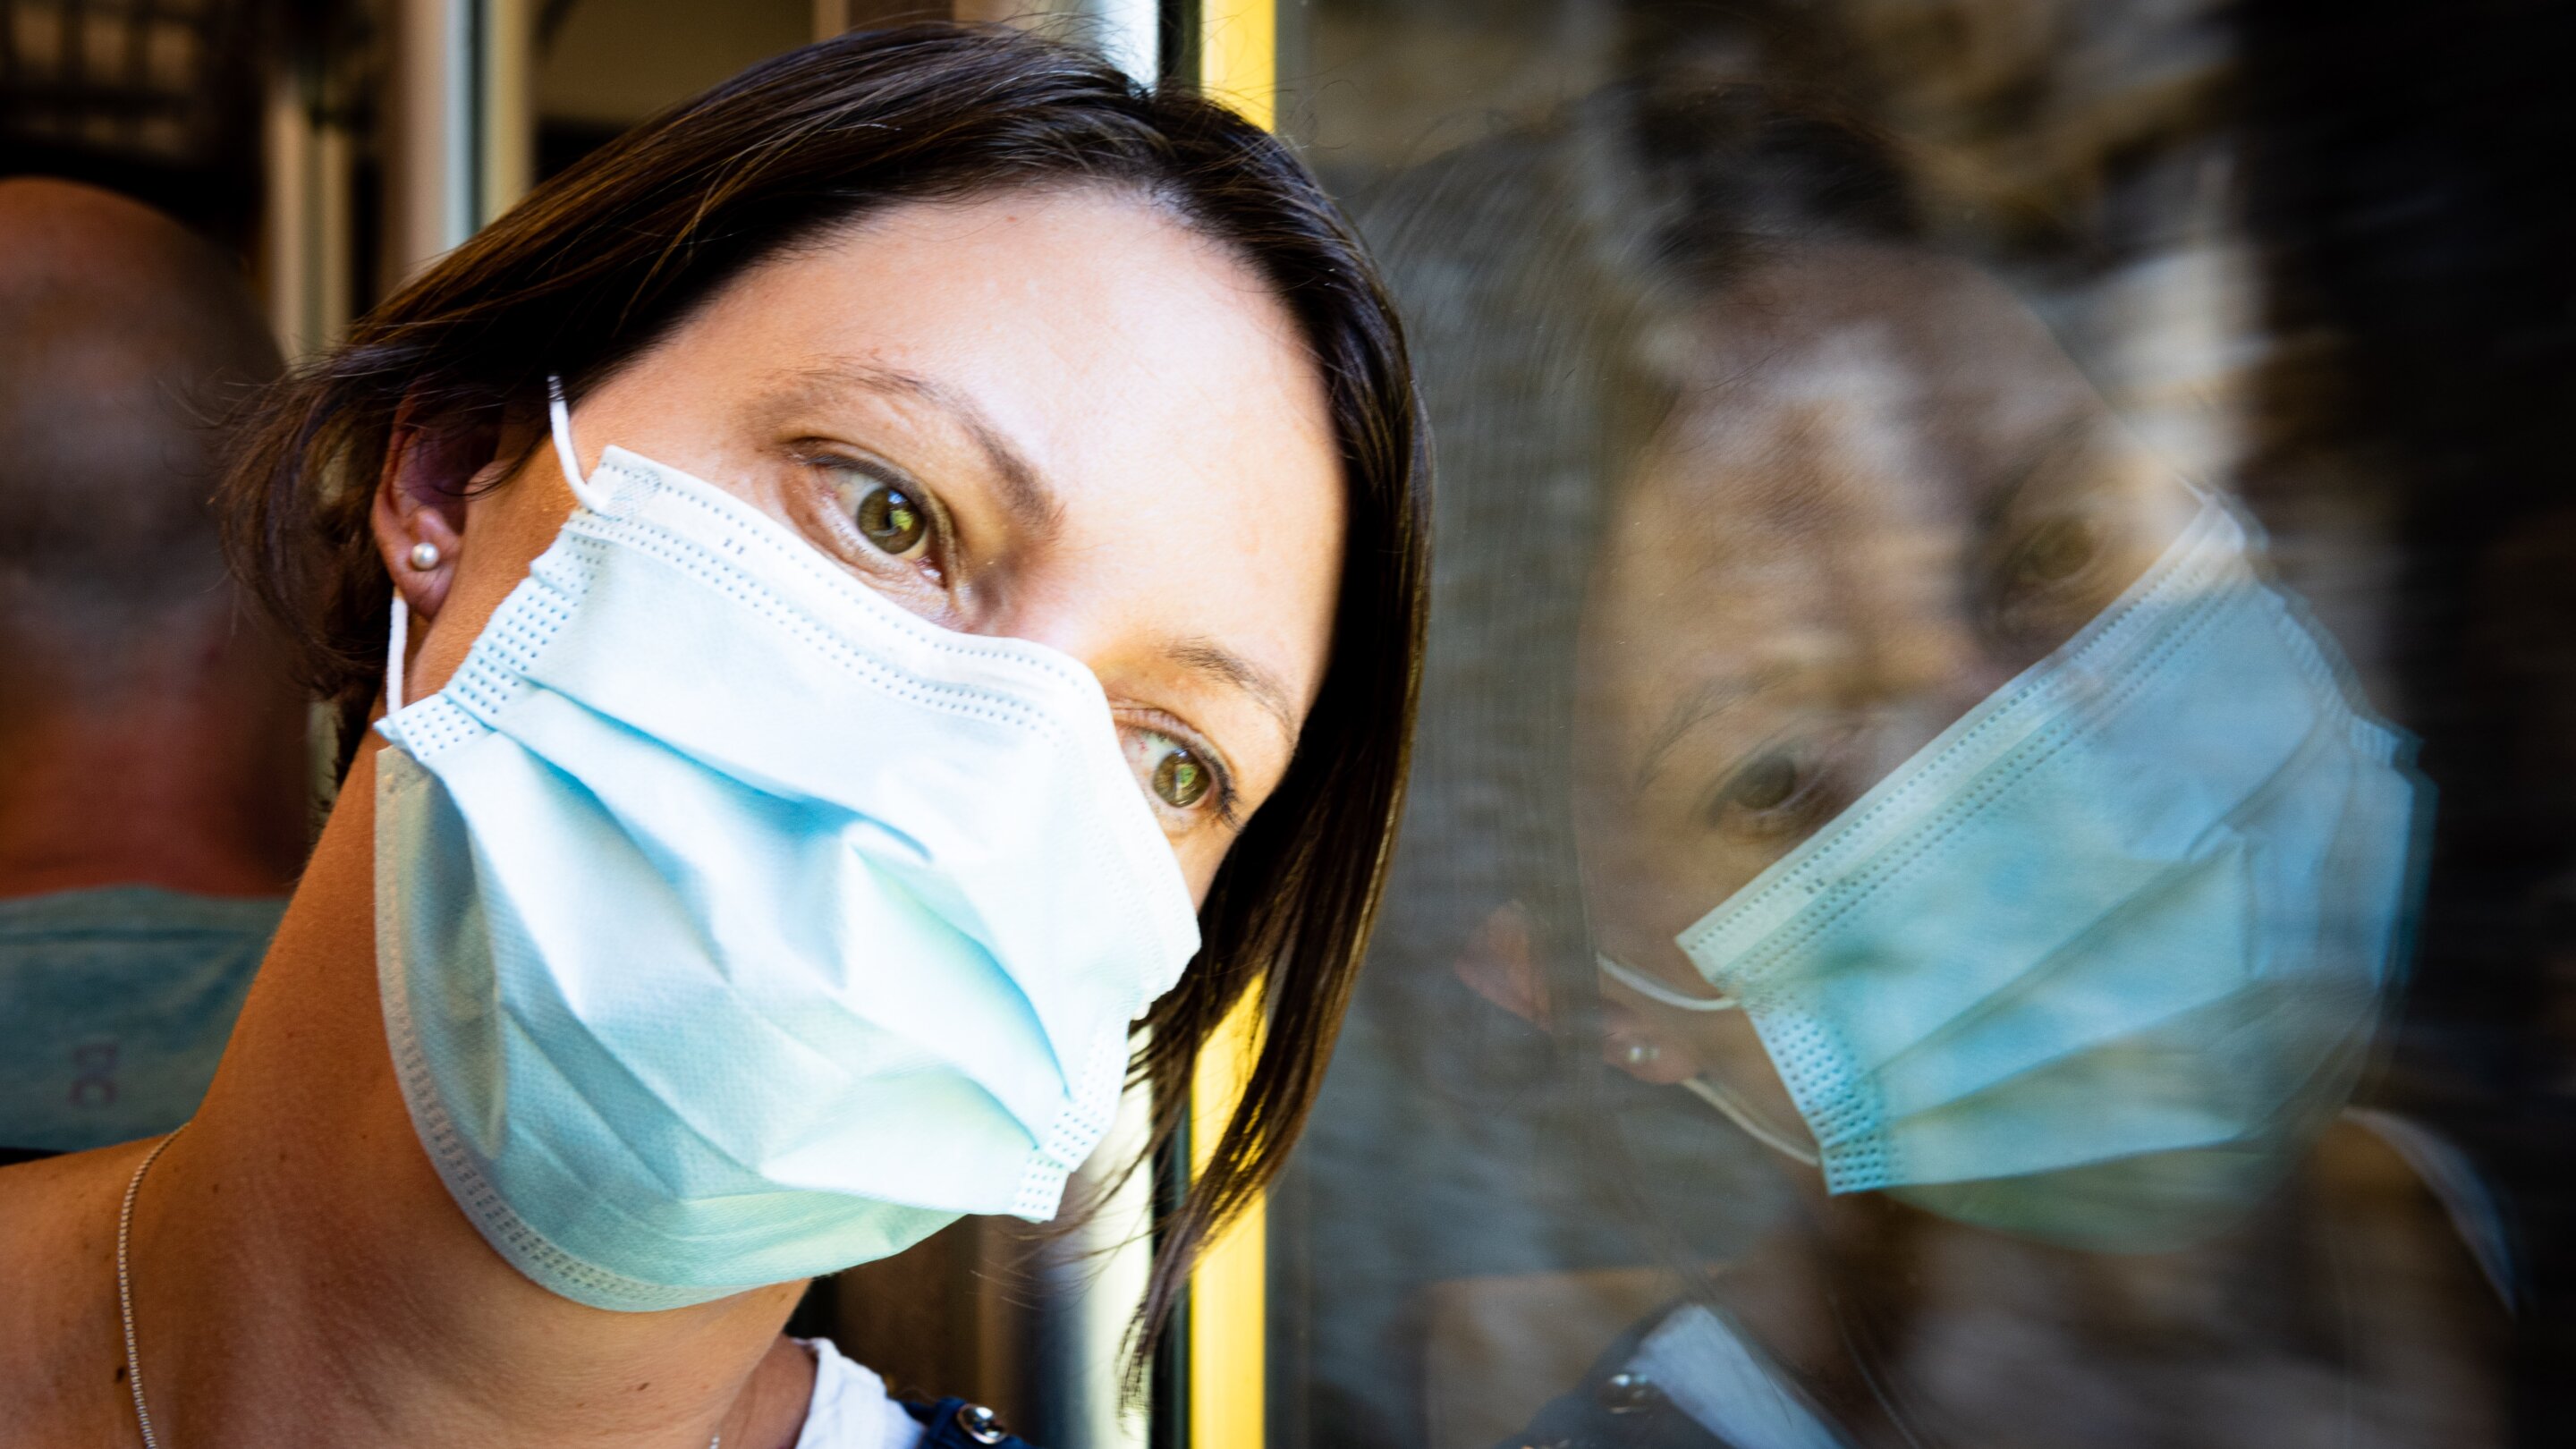 #Did you skip going to the doctor during the pandemic? You’re not alone